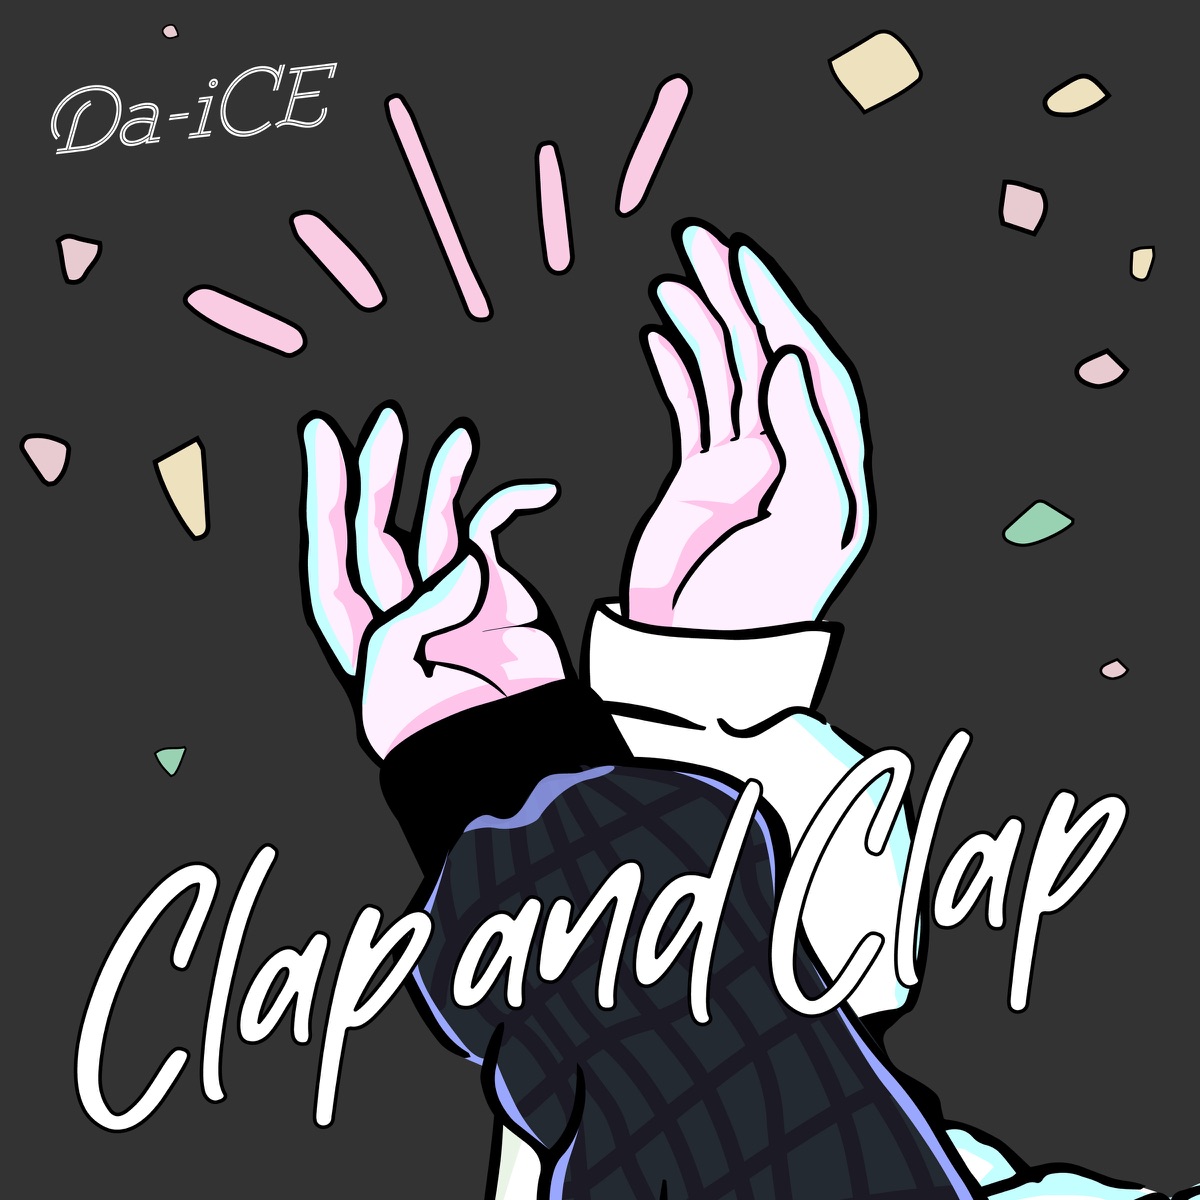 Cover art for『Da-iCE - Clap and Clap』from the release『Clap and Clap